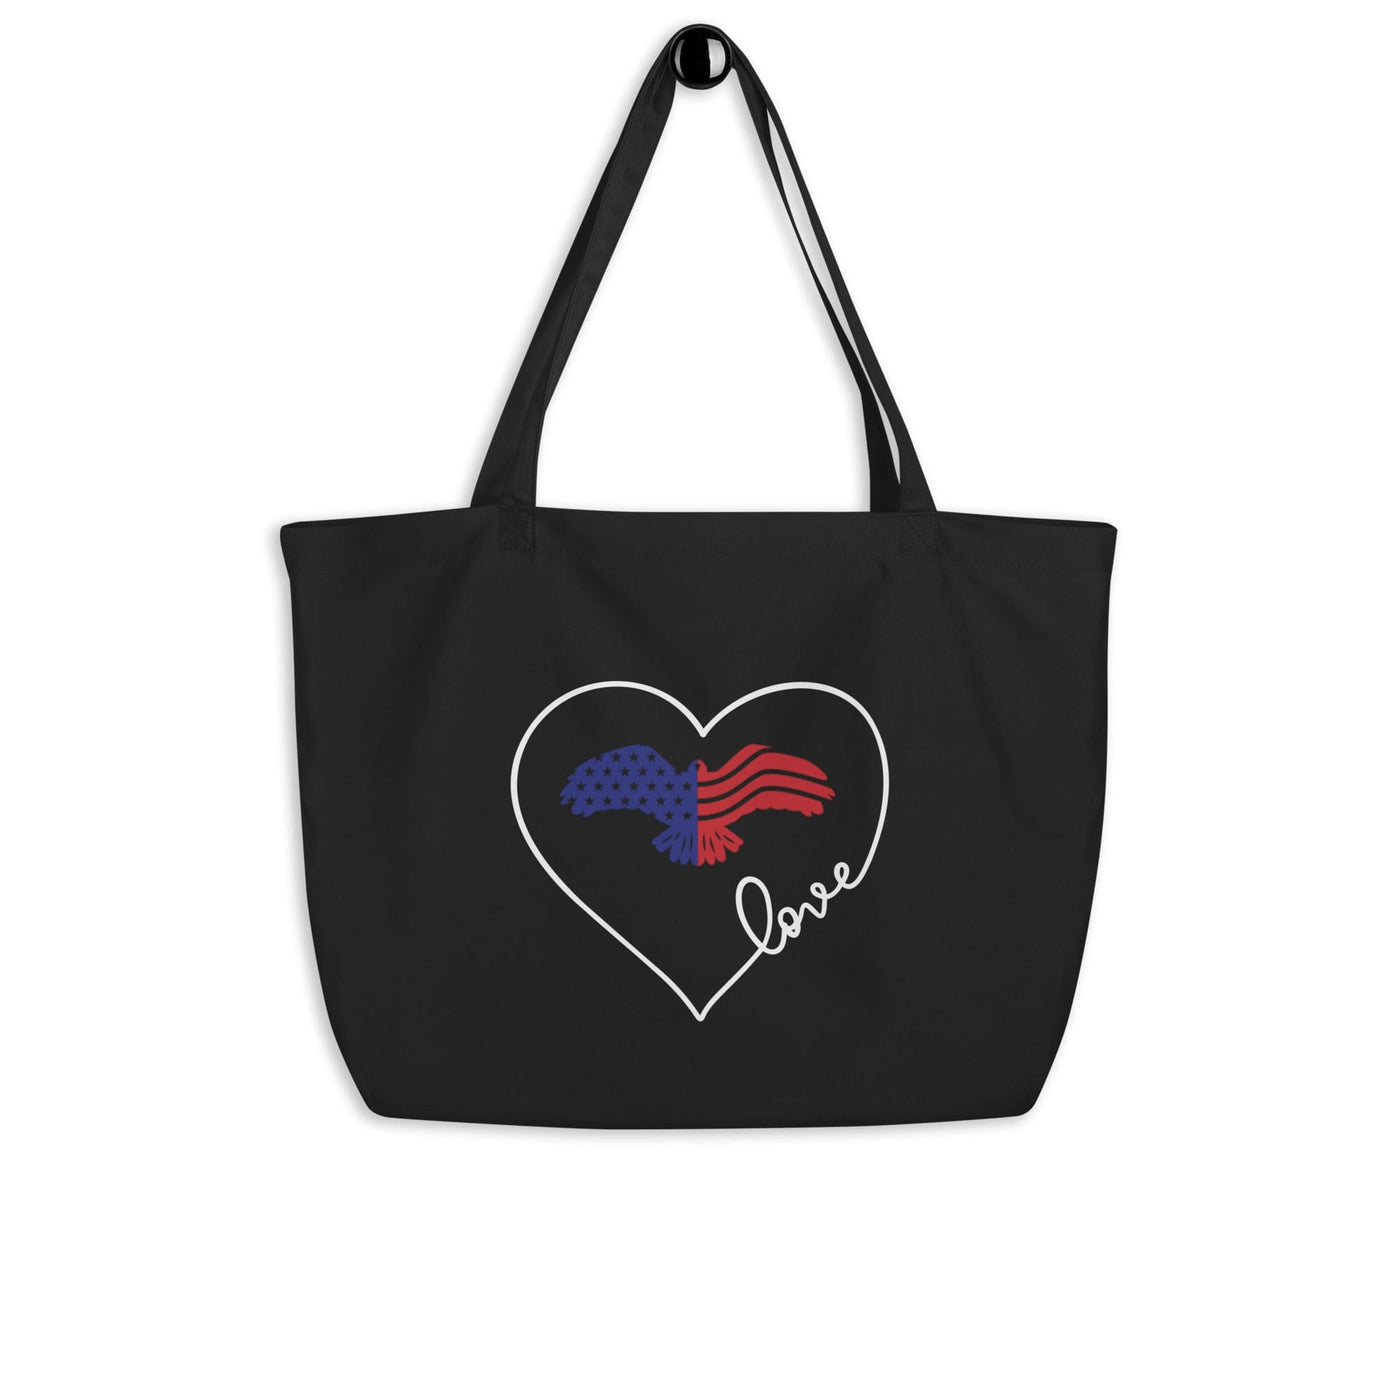 Large Black Tote Bag - Red Blue White Eagle Heart Inspirational Print - Bags |